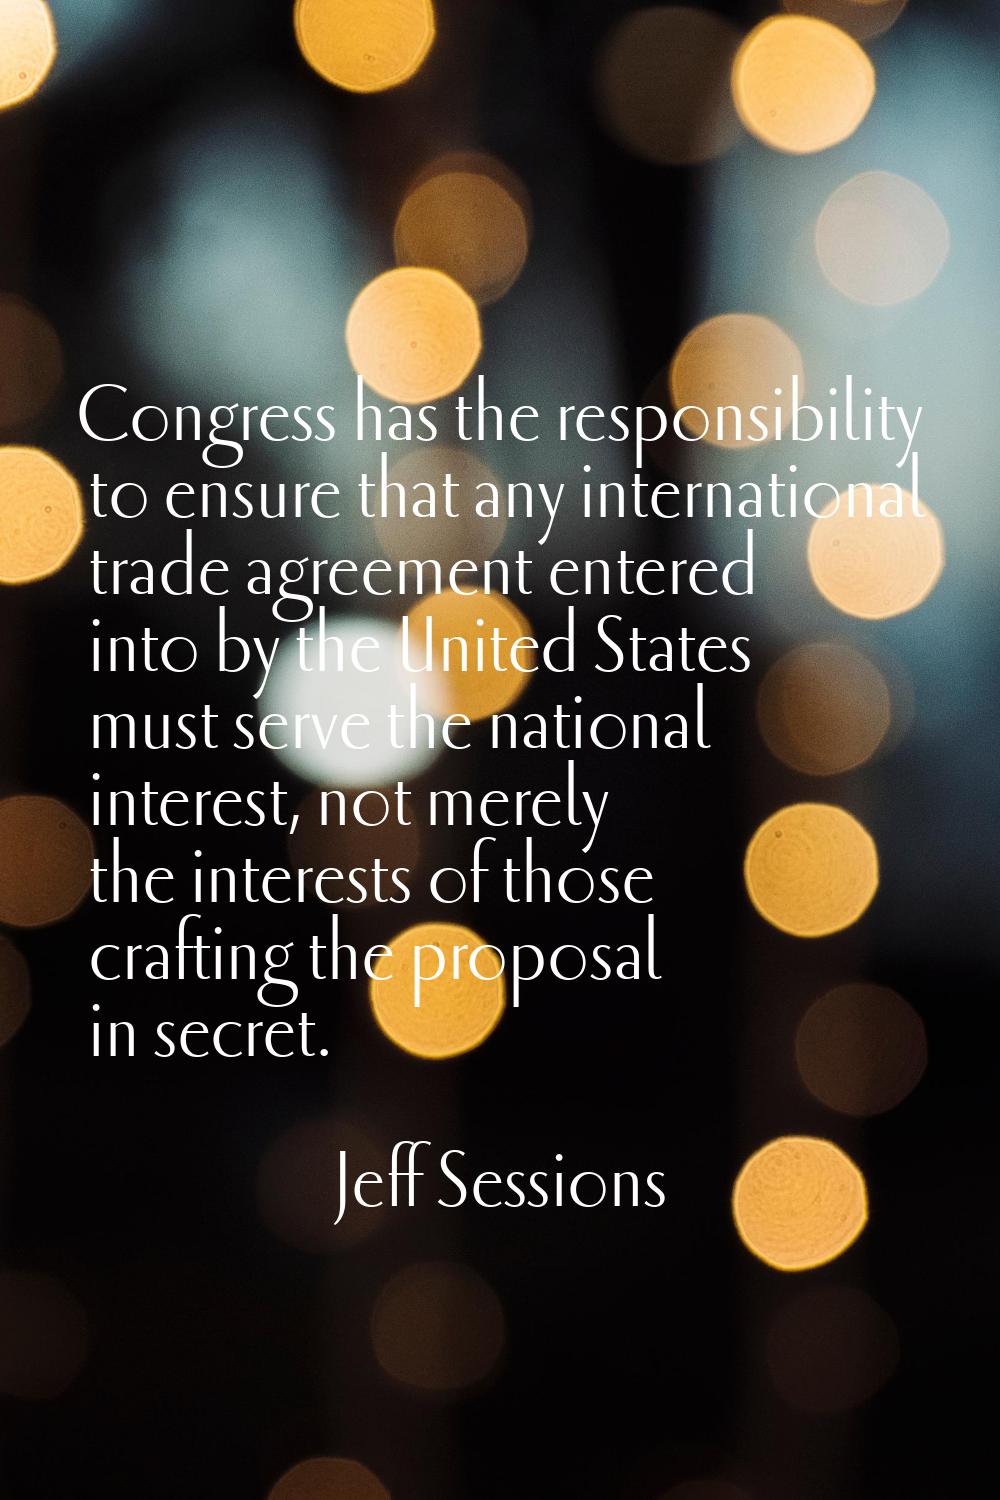 Congress has the responsibility to ensure that any international trade agreement entered into by th